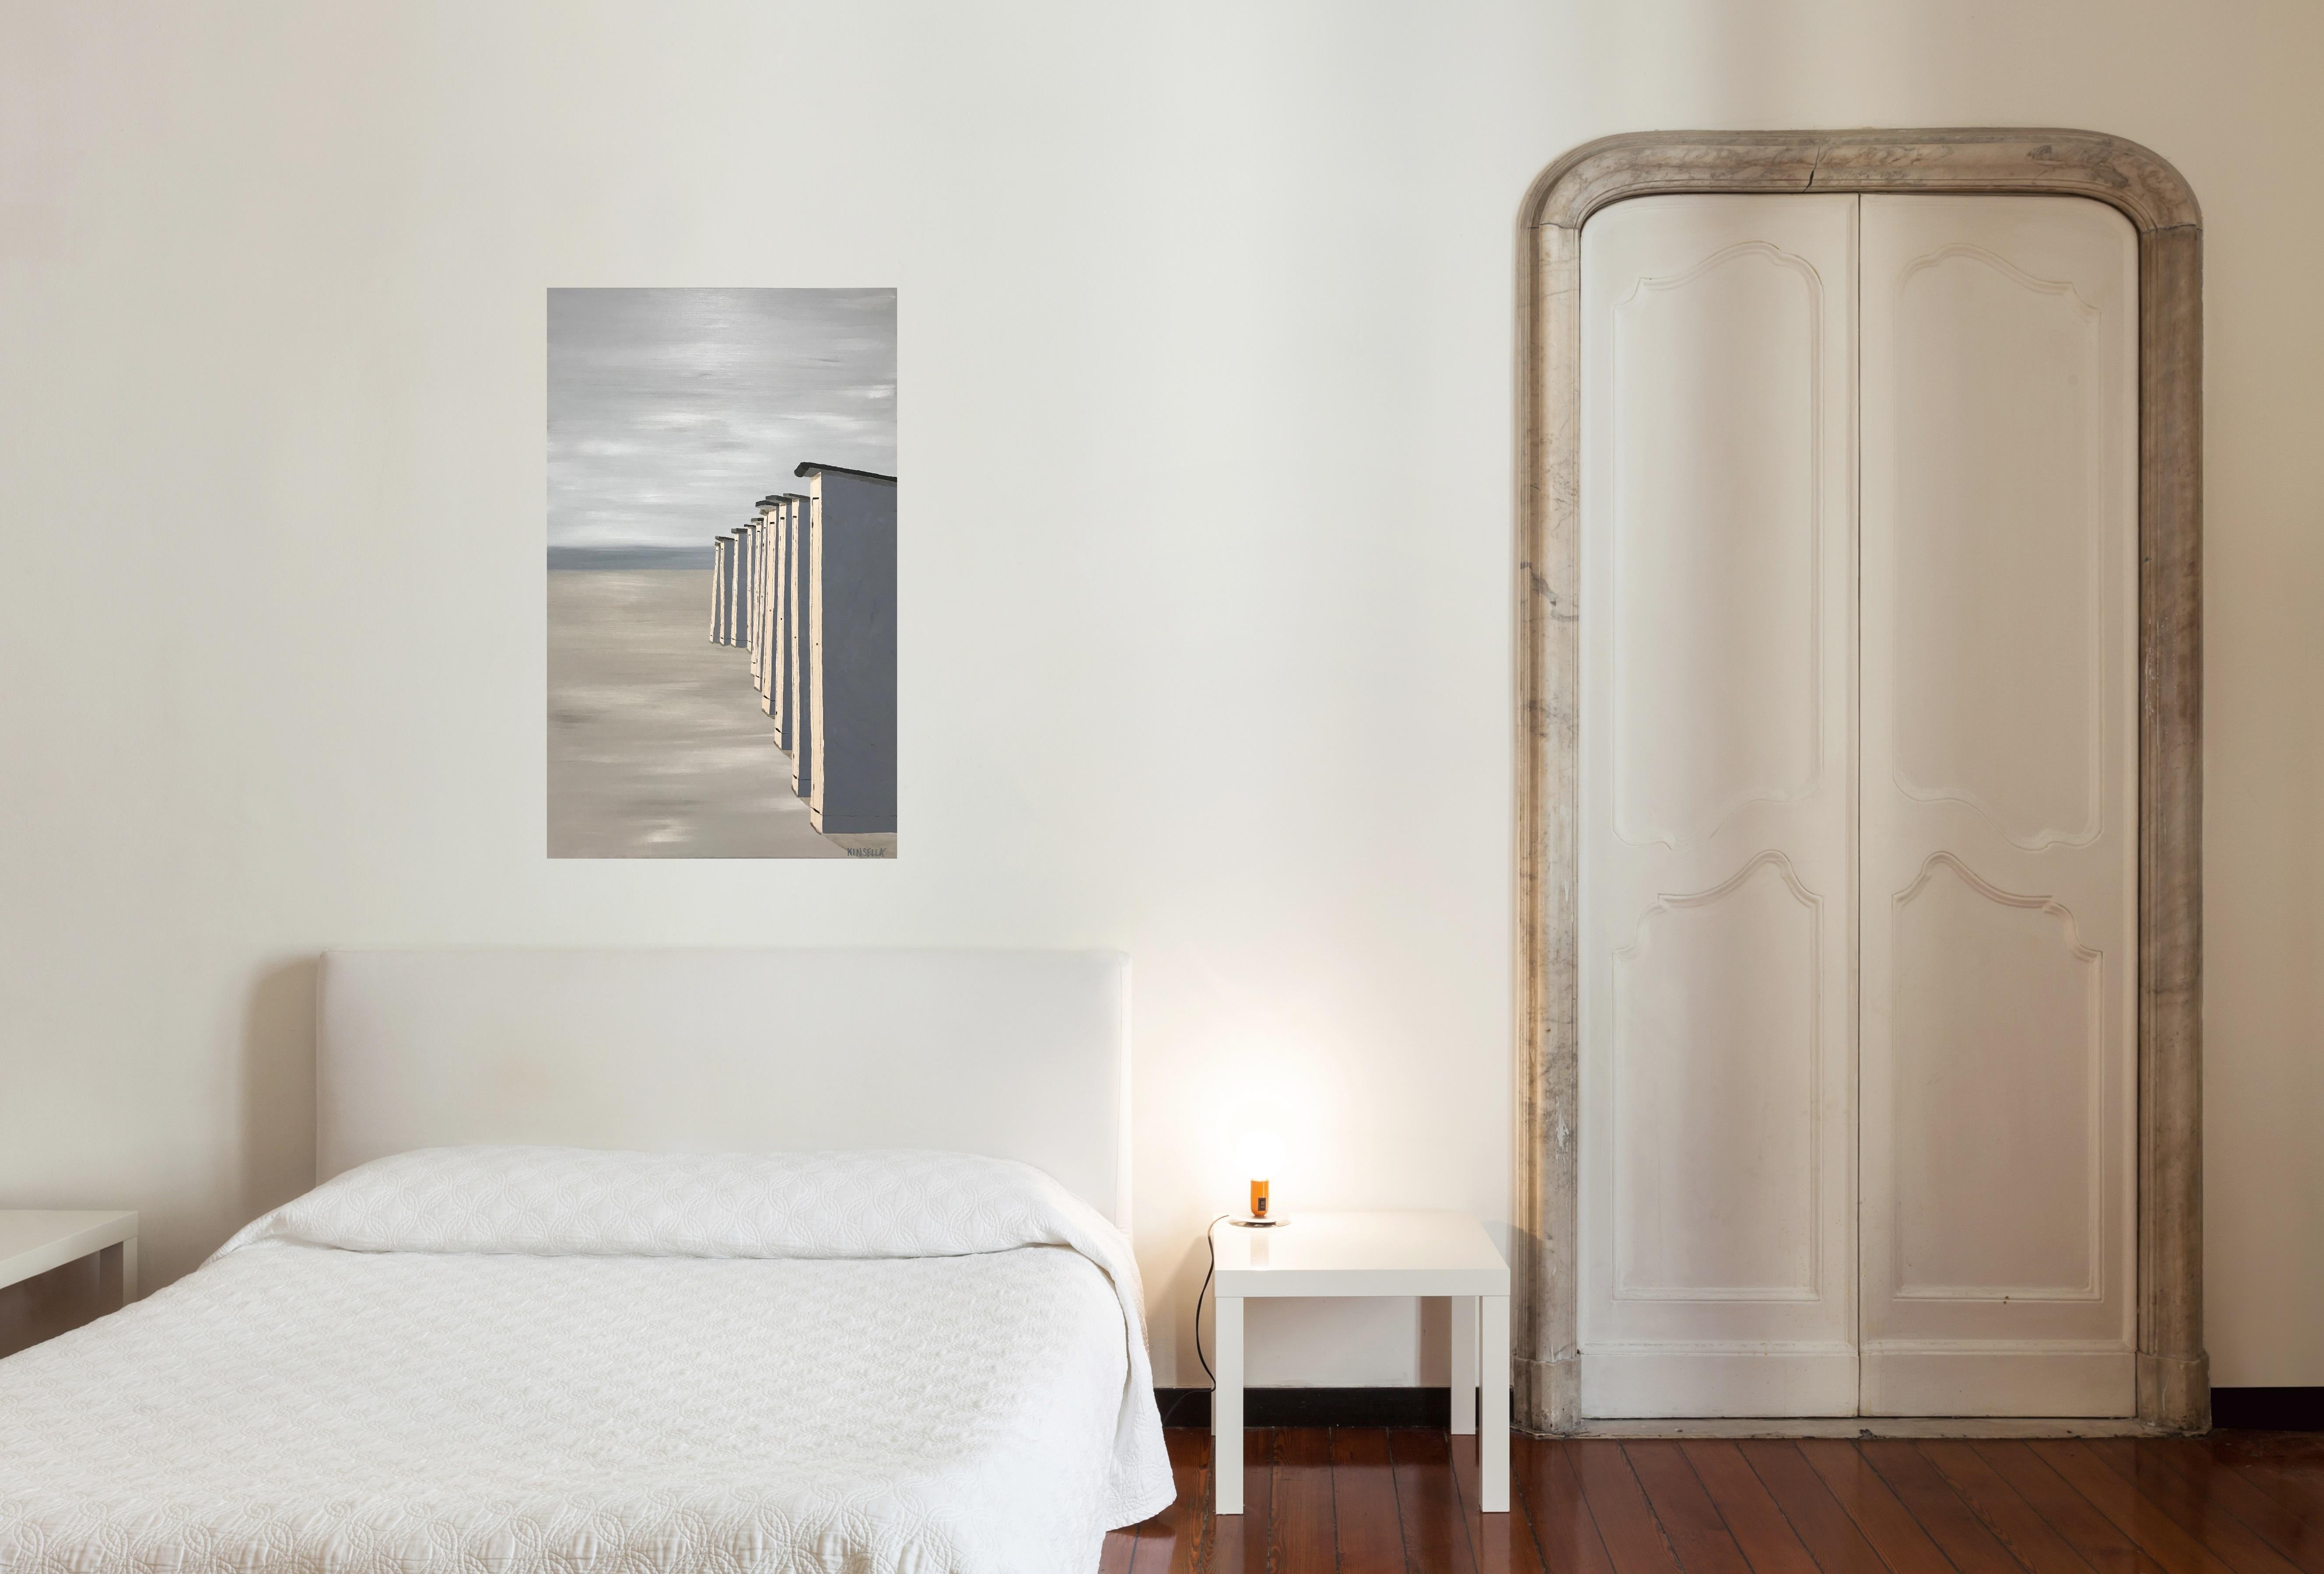 'Le Coucher du Soleil' is a vertical realist oil on canvas beach painting created by American artist Susan Kinsella in 2018. Featuring a soft palette mostly made of beige and grey colors accented by black highlights, the painting shows an